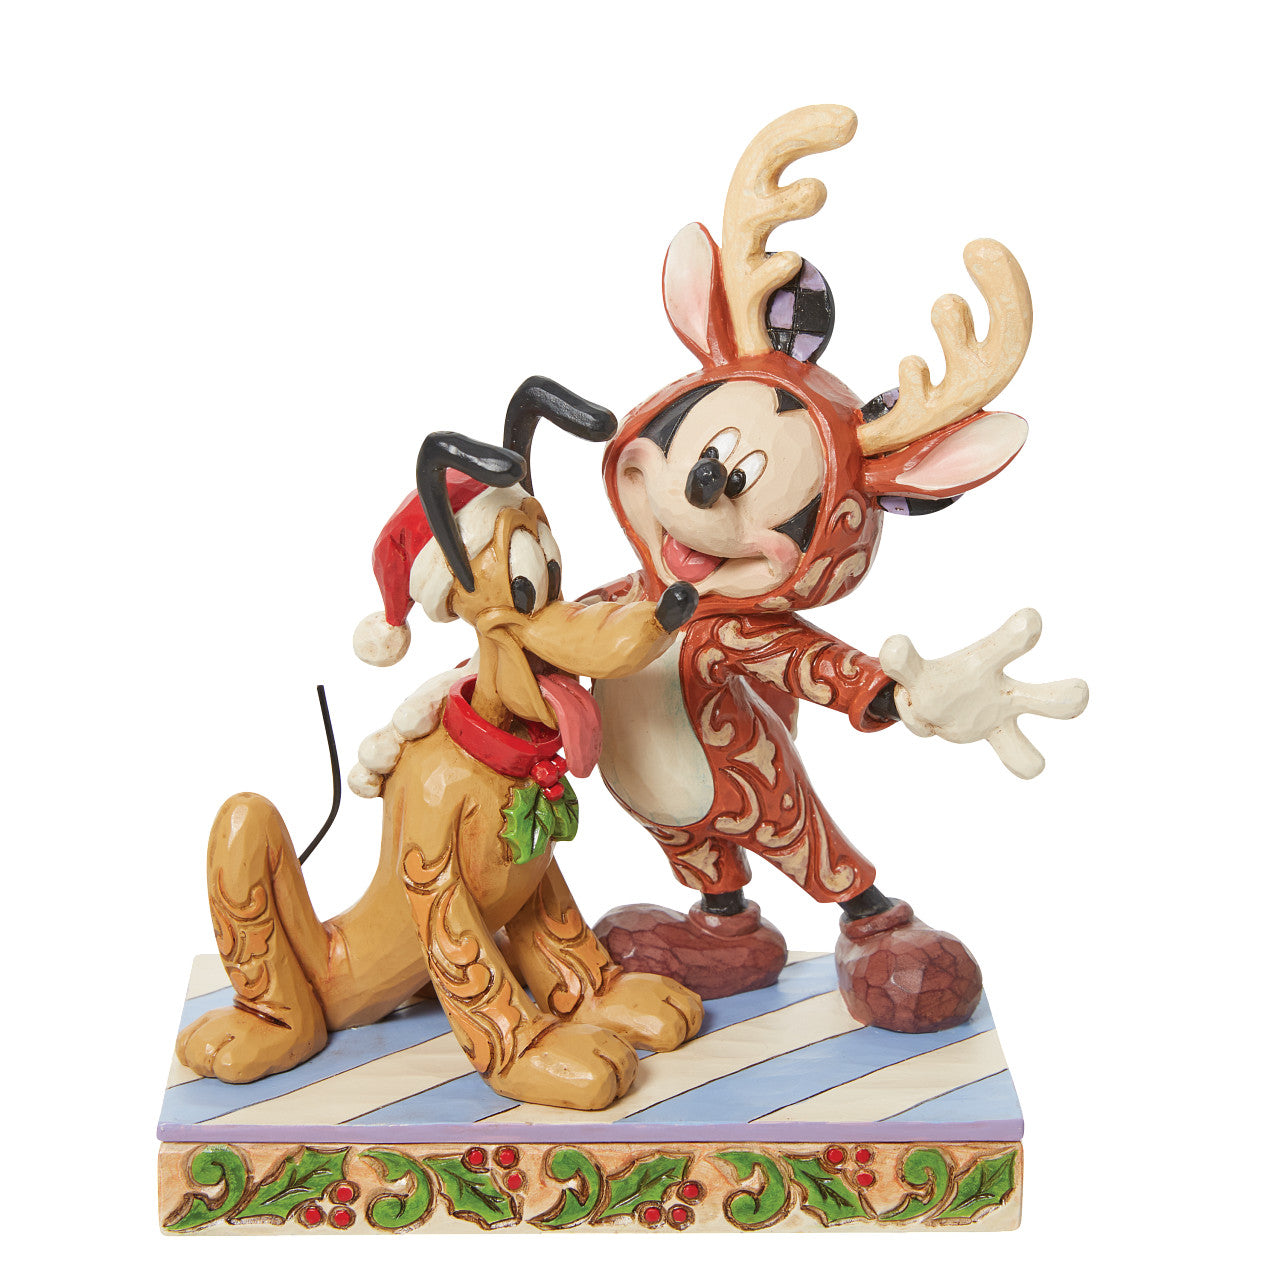 Festive Friends - Mickey in Reindeer Costume with Pluto